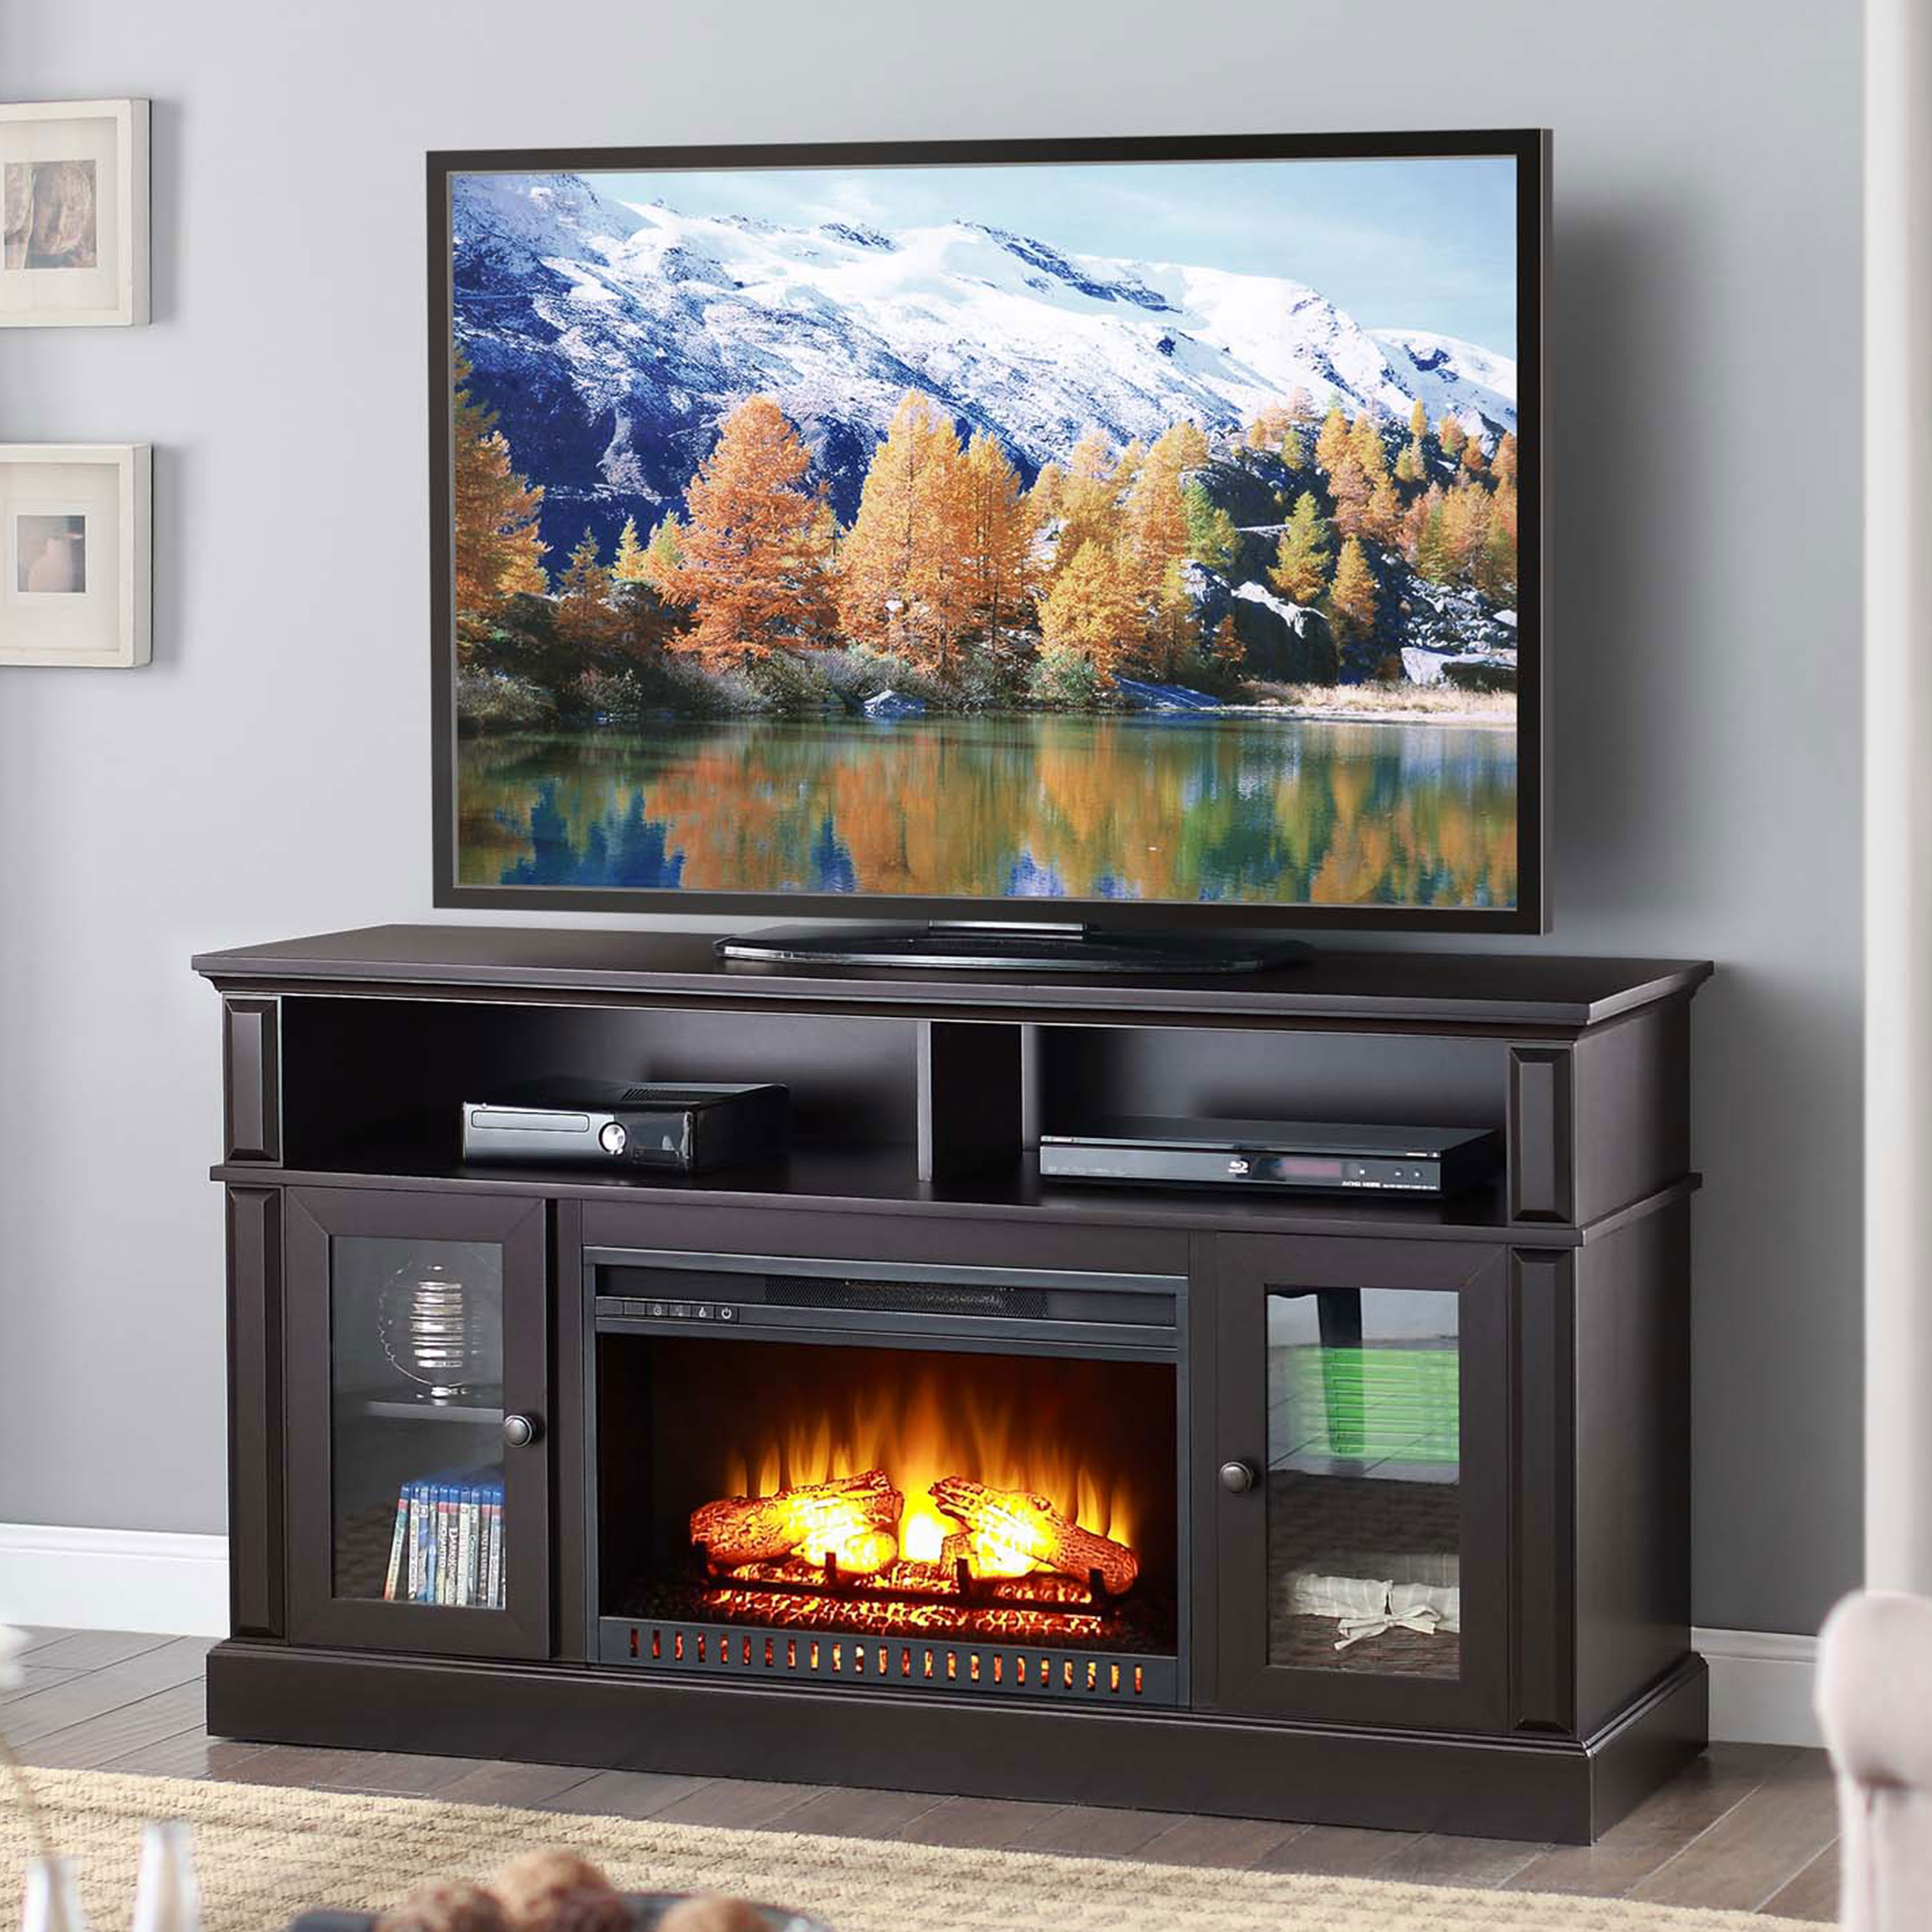 Rustic Entertainment Center with Fireplace Elegant Whalen Barston Media Fireplace for Tv S Up to 70 Multiple Finishes